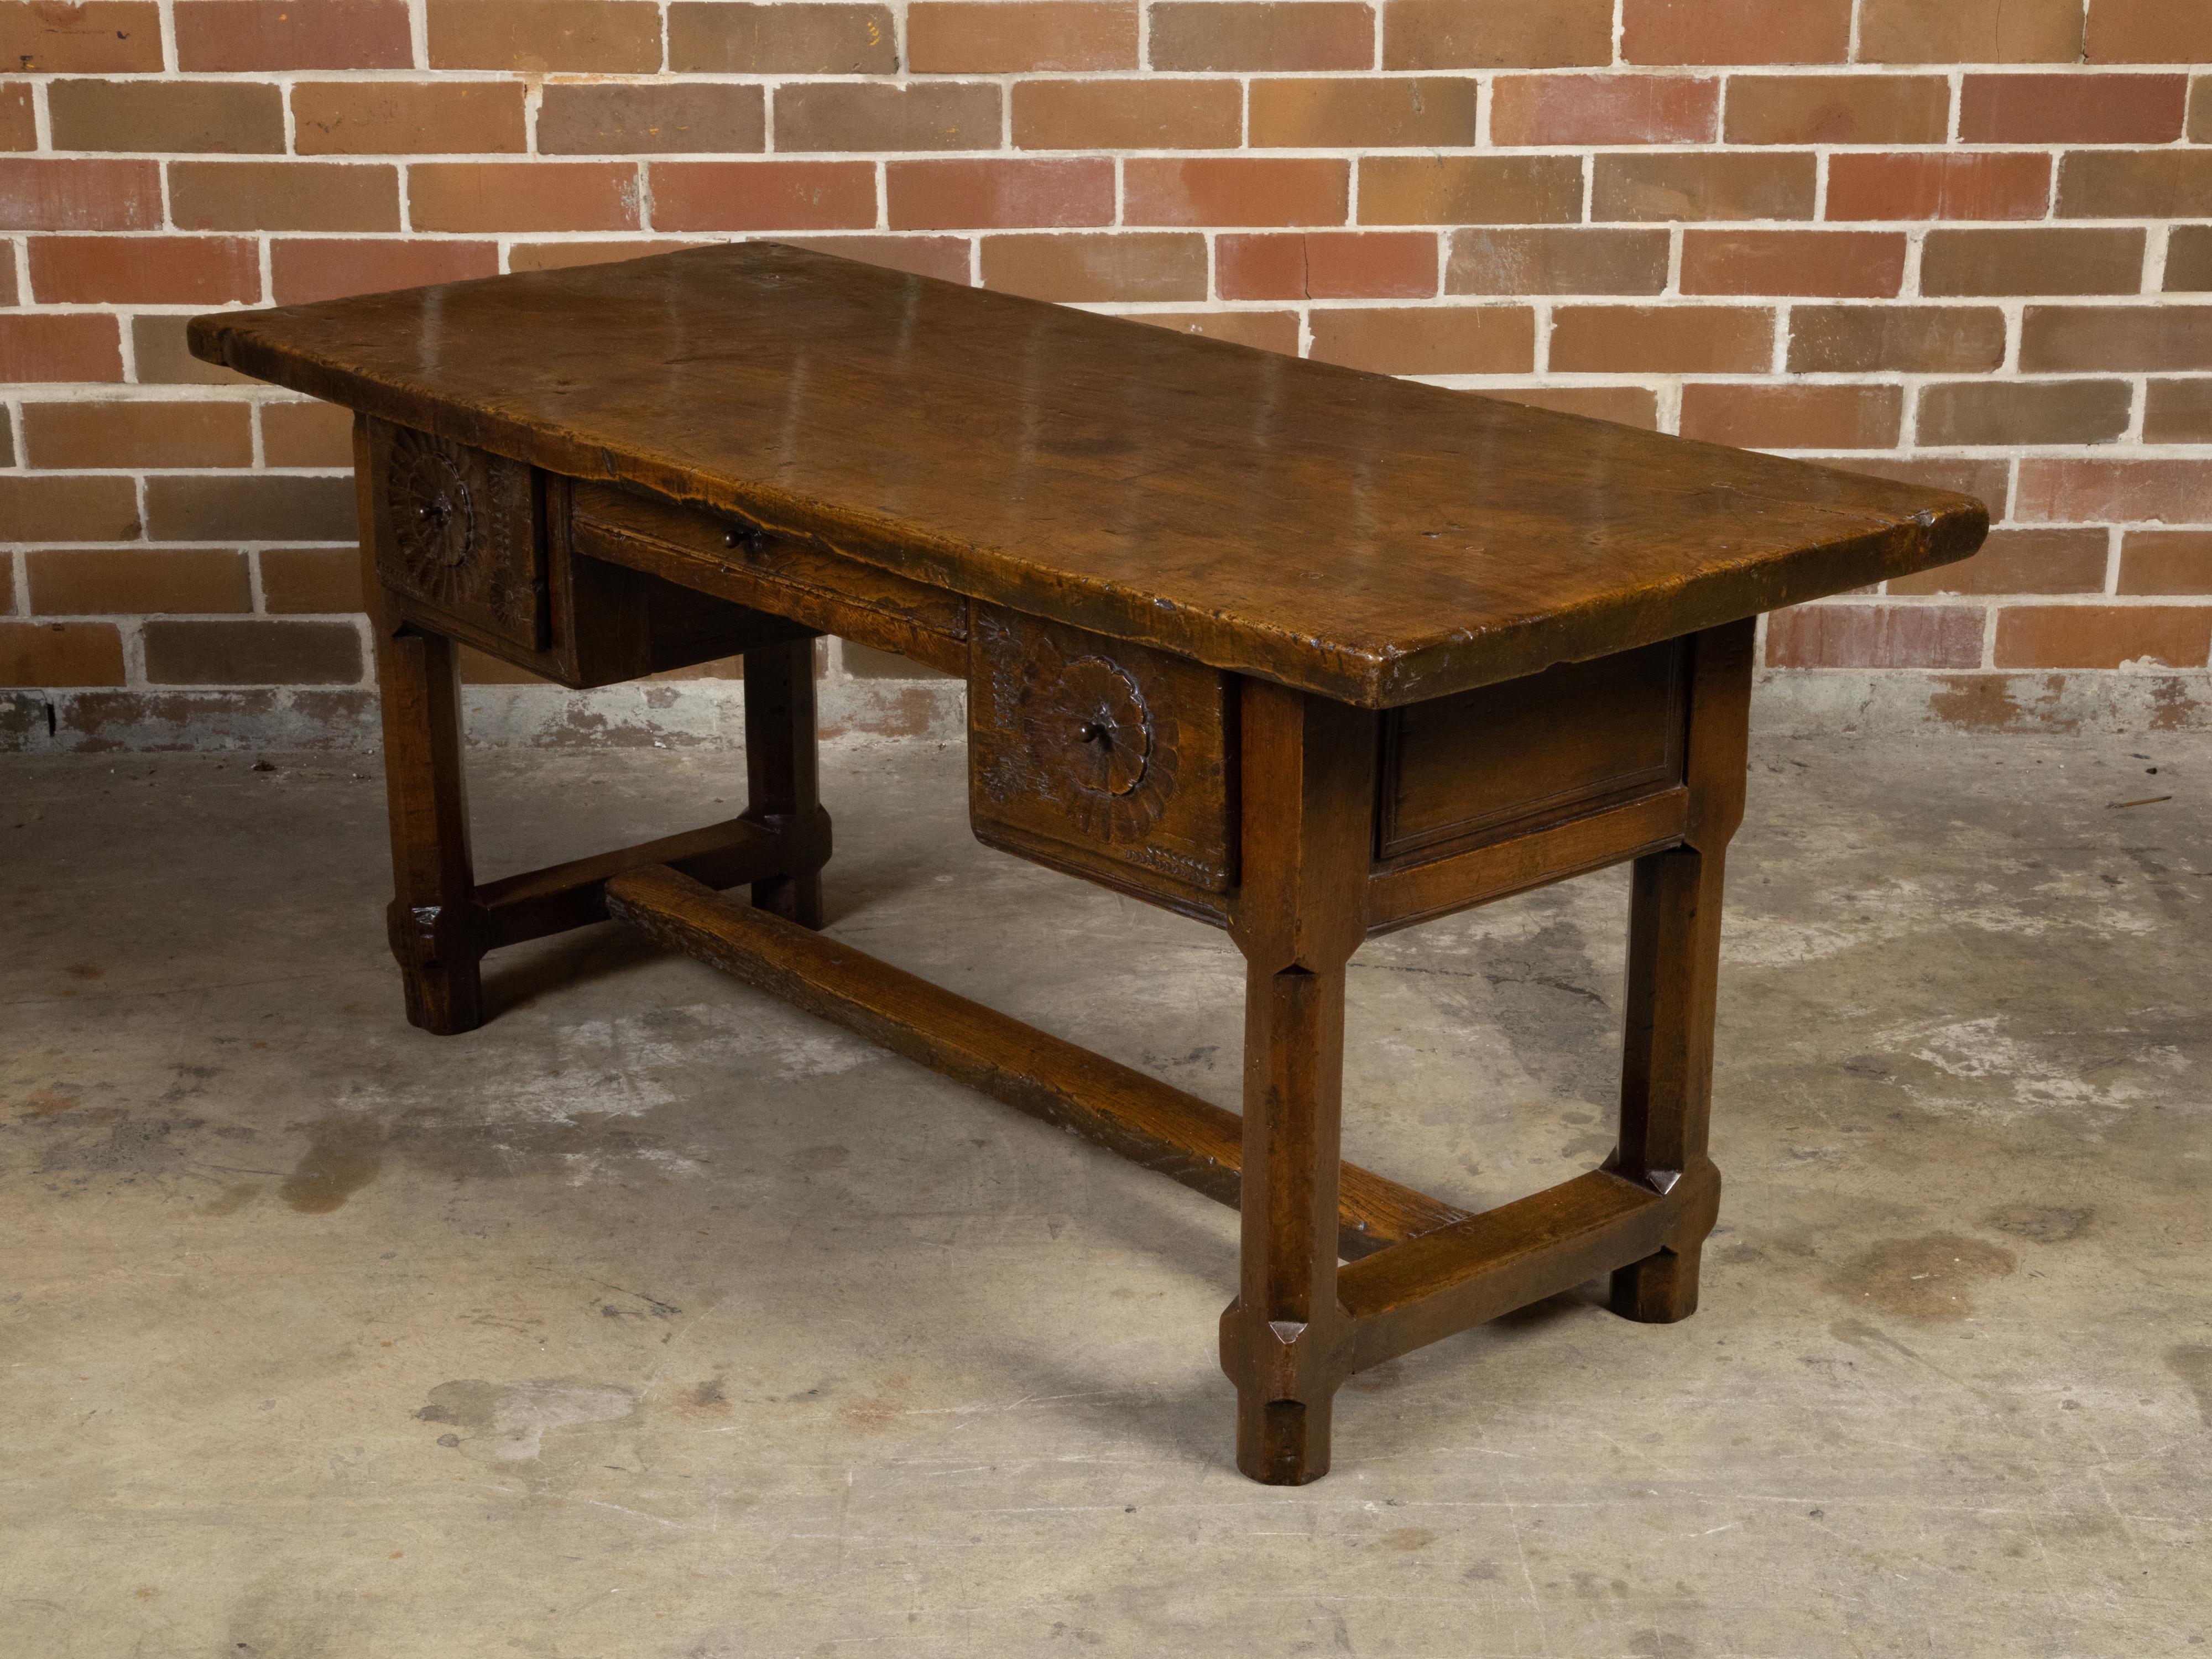 French 1800s Walnut Desk with Three Drawers, Carved Floral Motifs and Patina For Sale 4